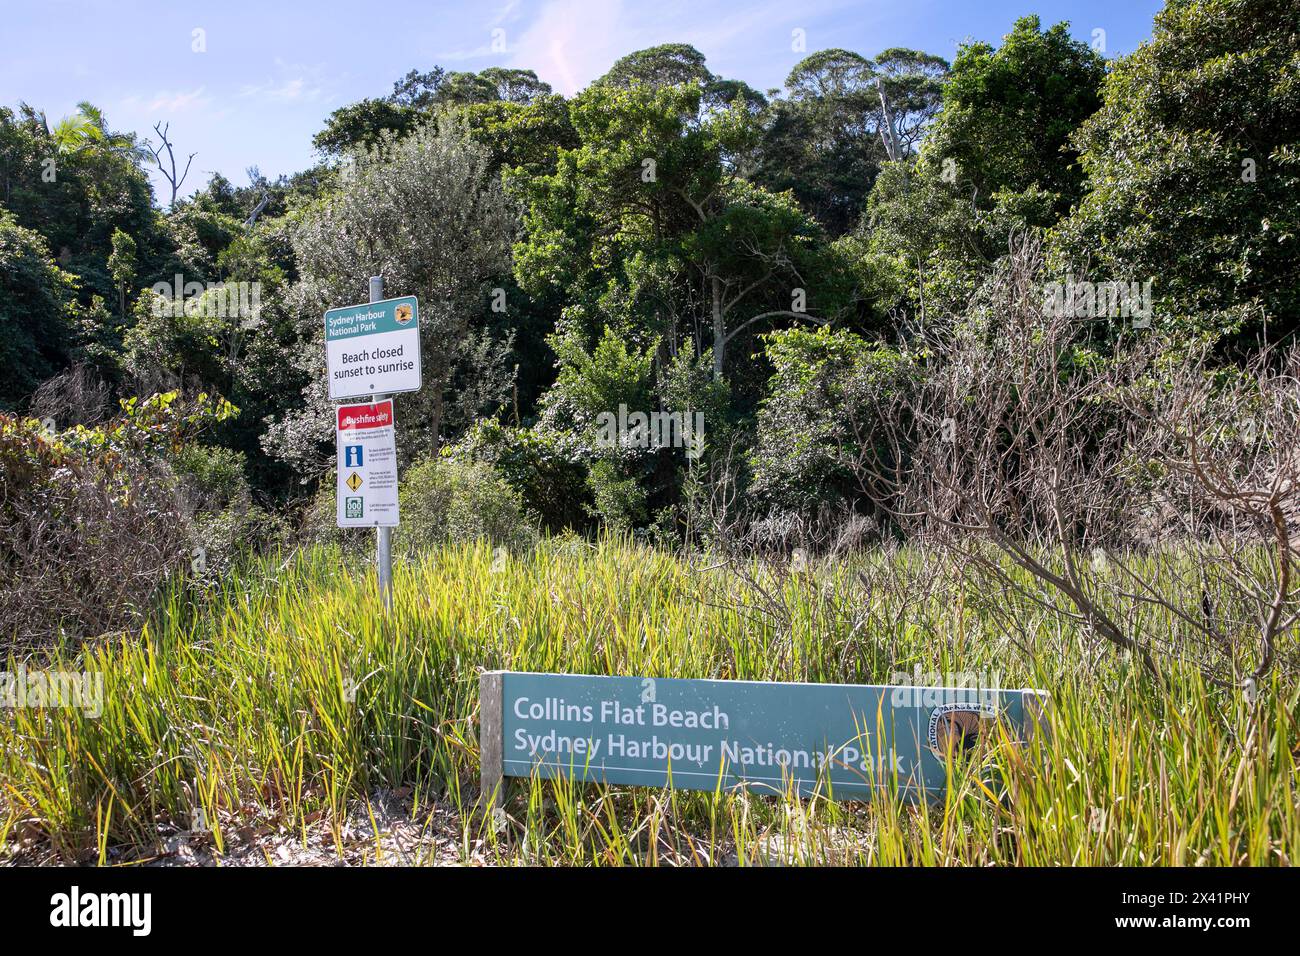 Collins Flat beach Manly in Sydney harbour national park, signage and information,Sydney,NSW,Australia Stock Photo